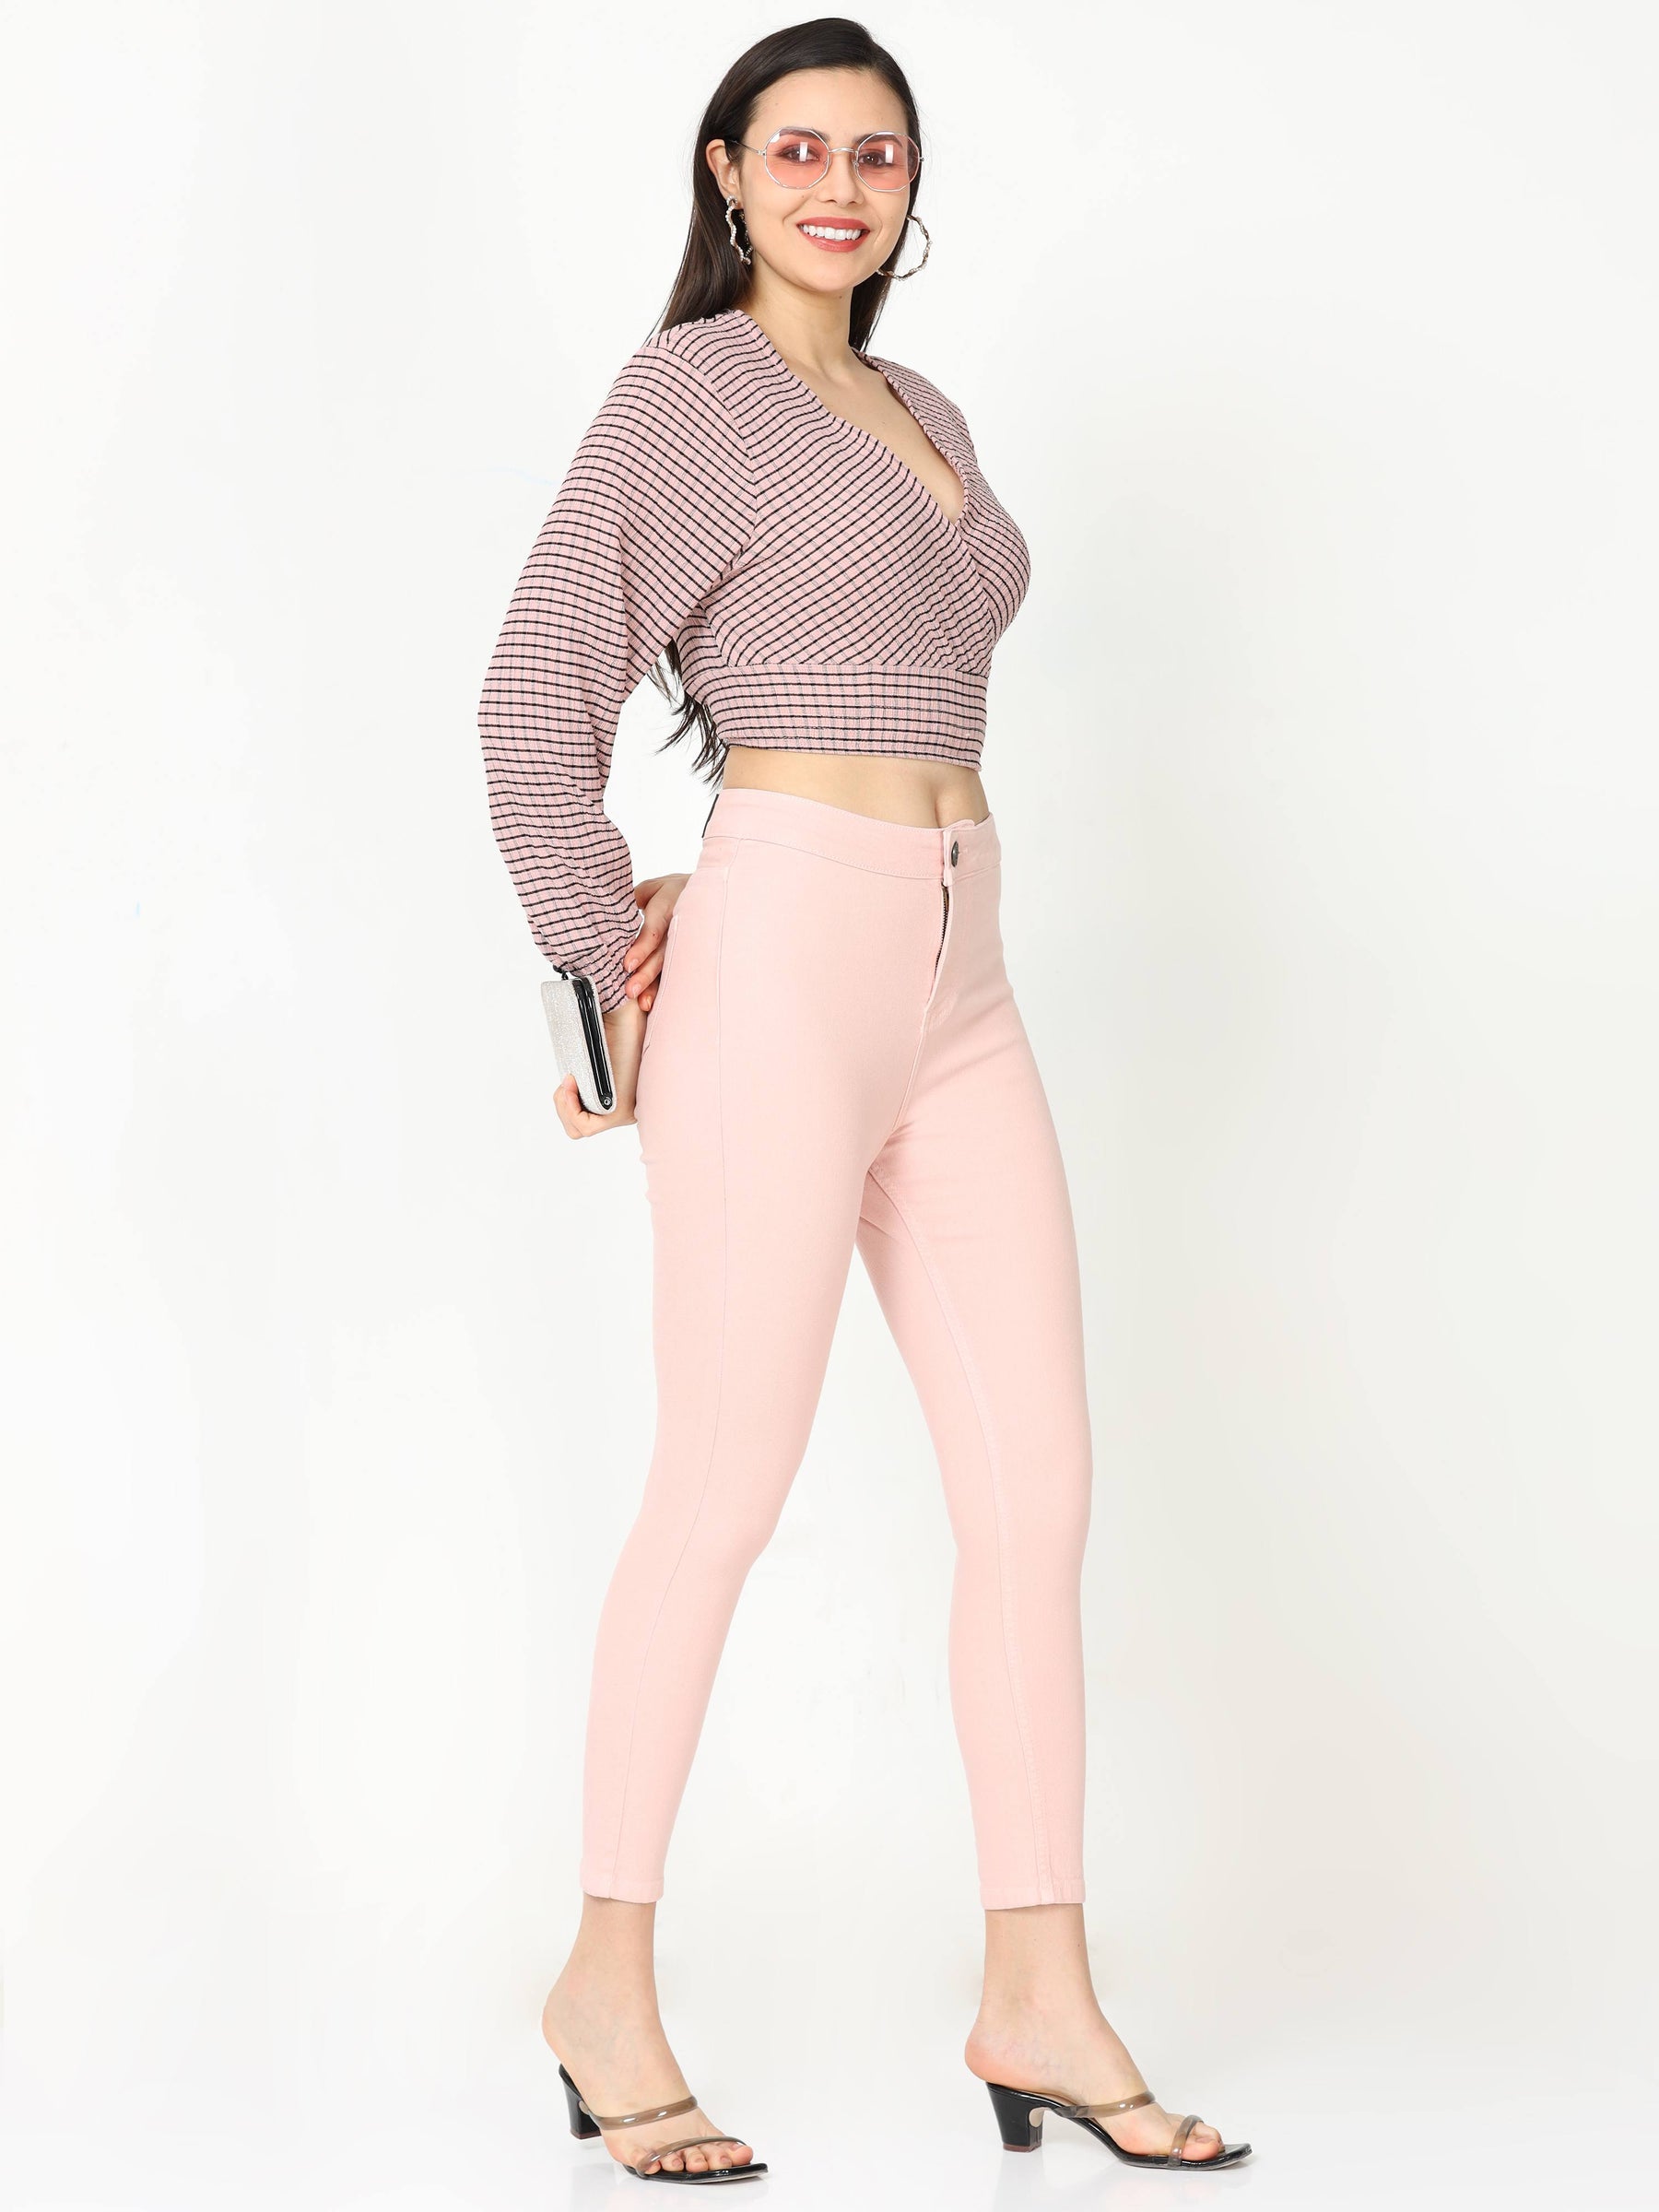 Skinny Baby Pink High Waist Jeans Ankle Fit